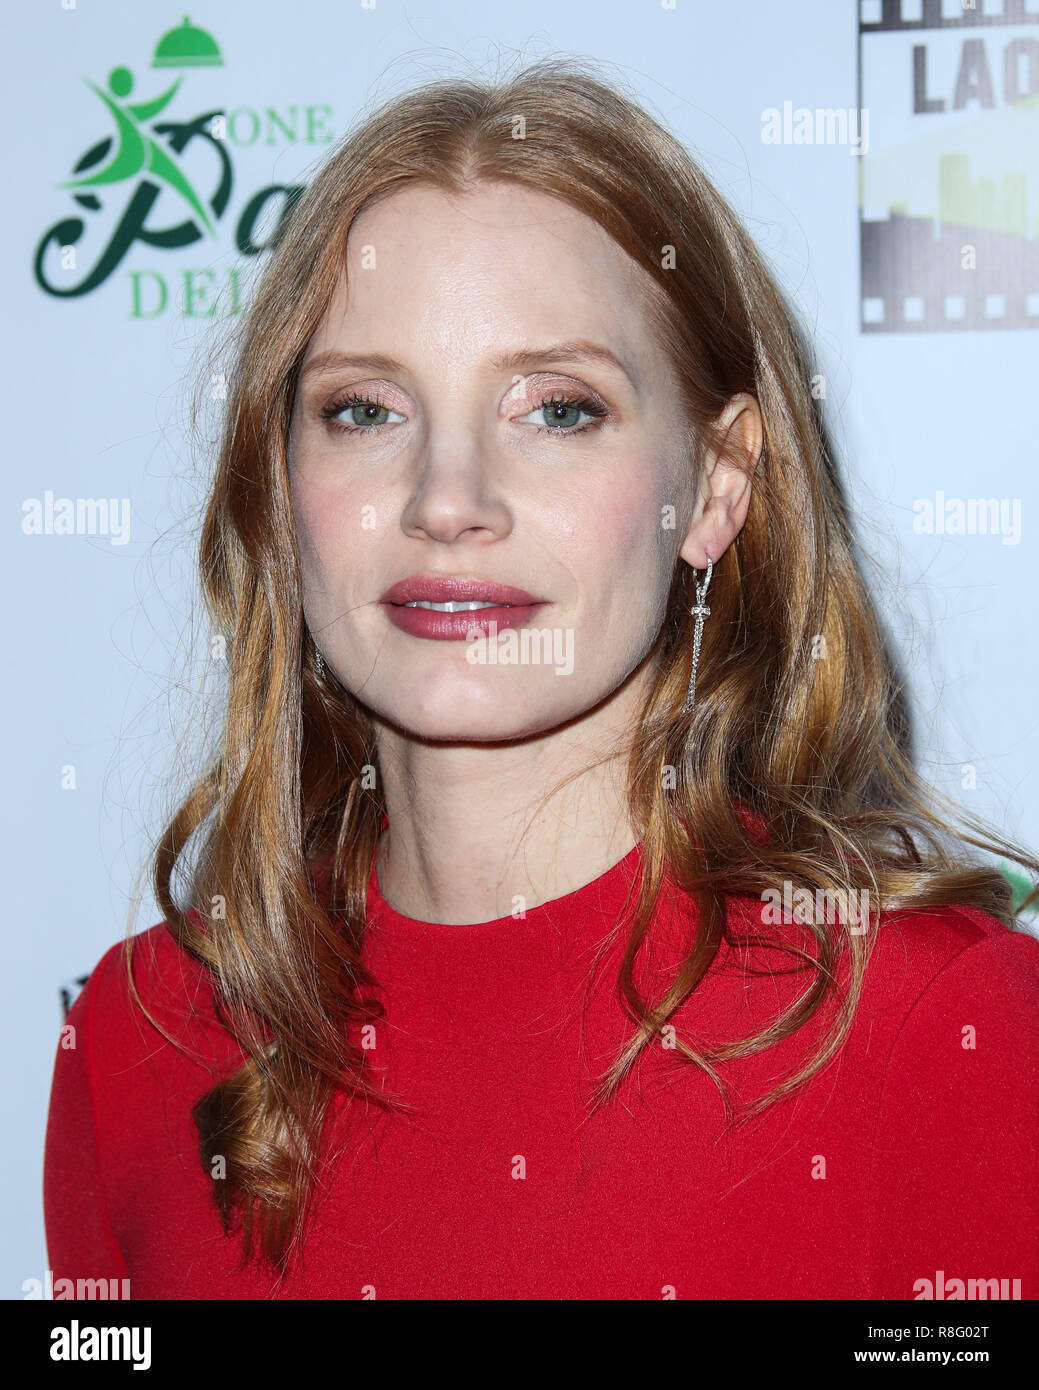 HOLLYWOOD, LOS ANGELES, CA, USA - JANUARY 10: Jessica Chastain at The Inaugural Los Angeles Online Film Critics Society Award Ceremony held at the Taglyan Complex on January 10, 2018 in Hollywood, Los Angeles, California, United States. (Photo by Xavier Collin/Image Press Agency) Stock Photo